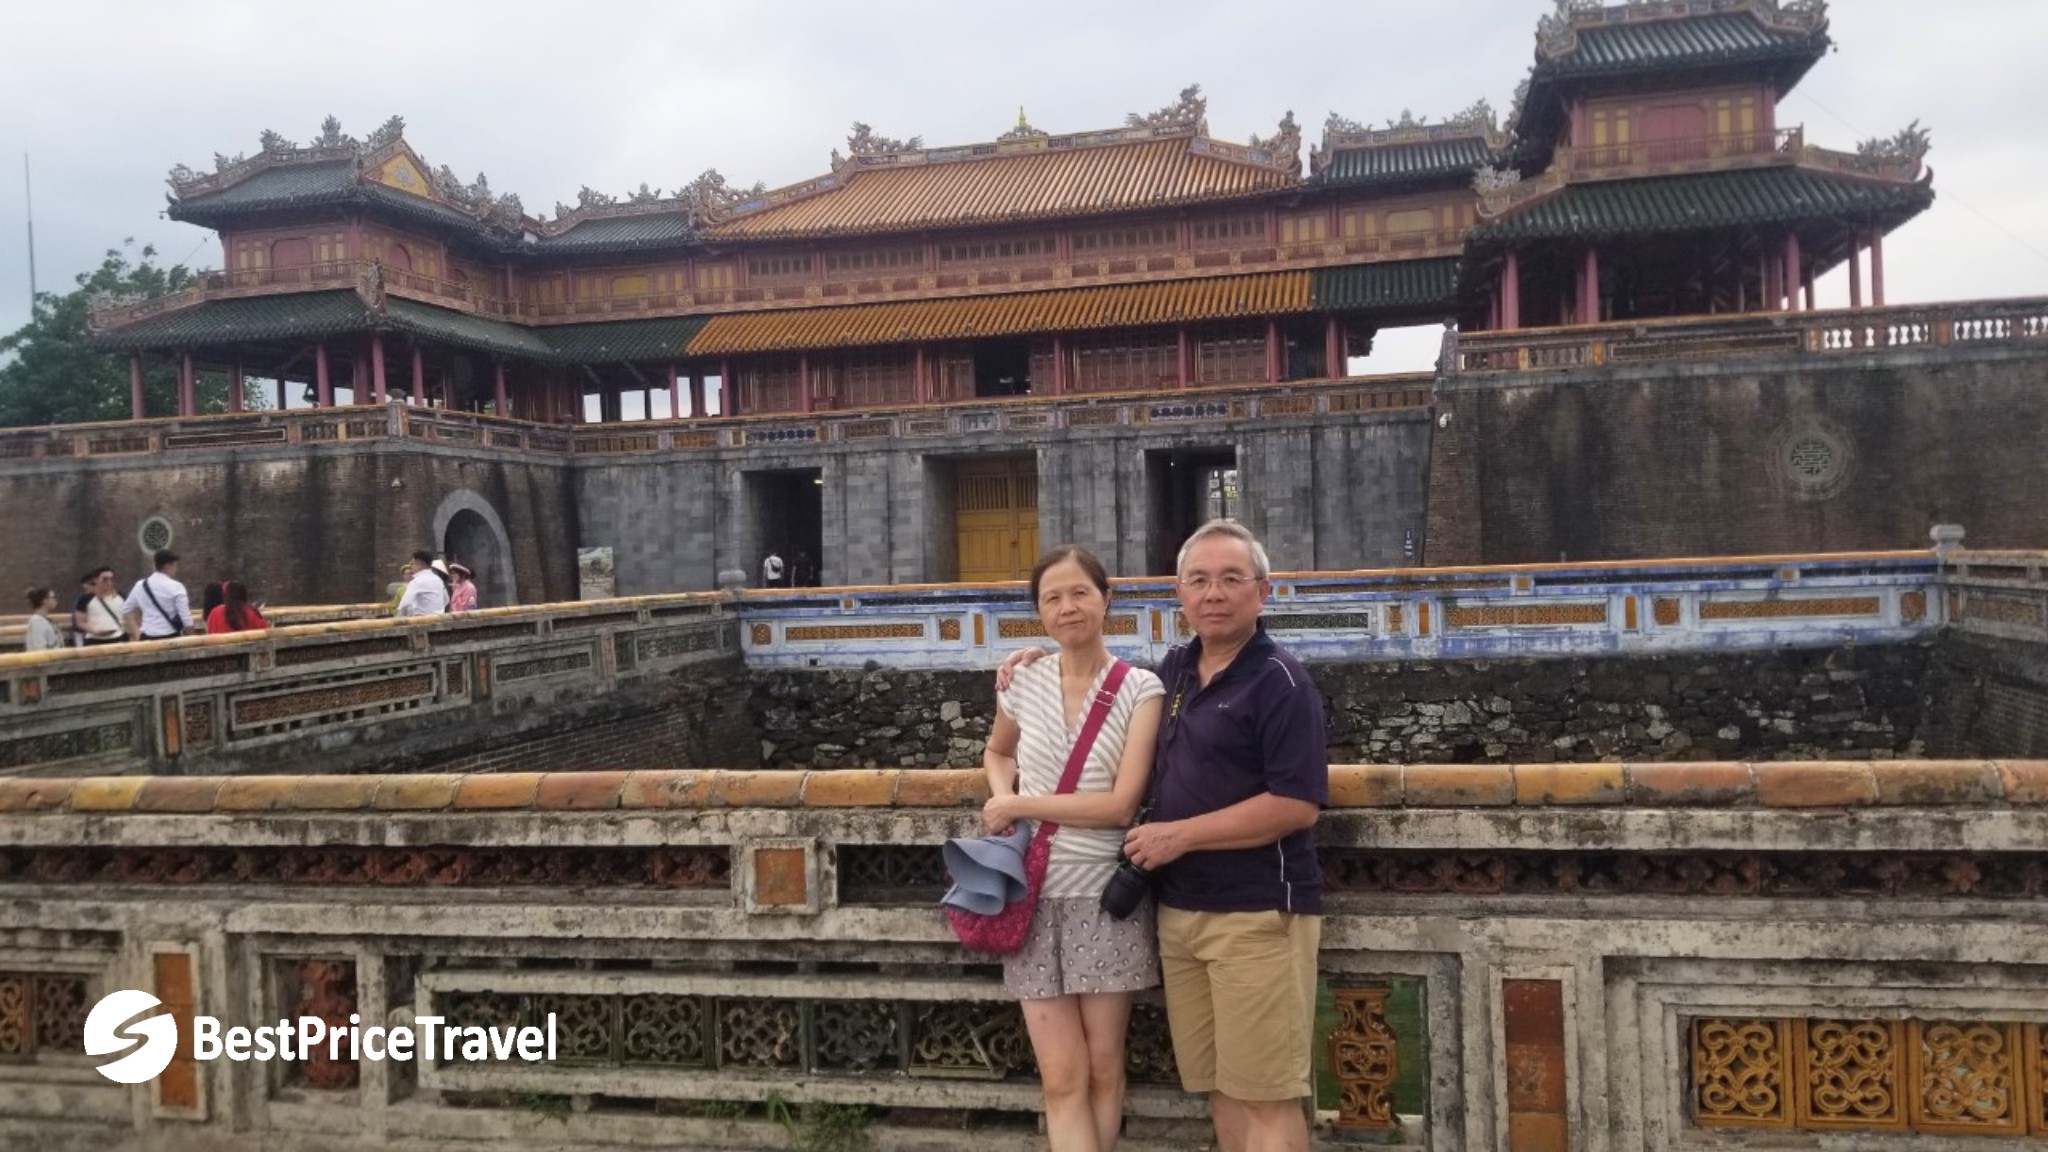 Day 5 The Former Imperial Capital Of Vietnam During The Nguyen Dynasty